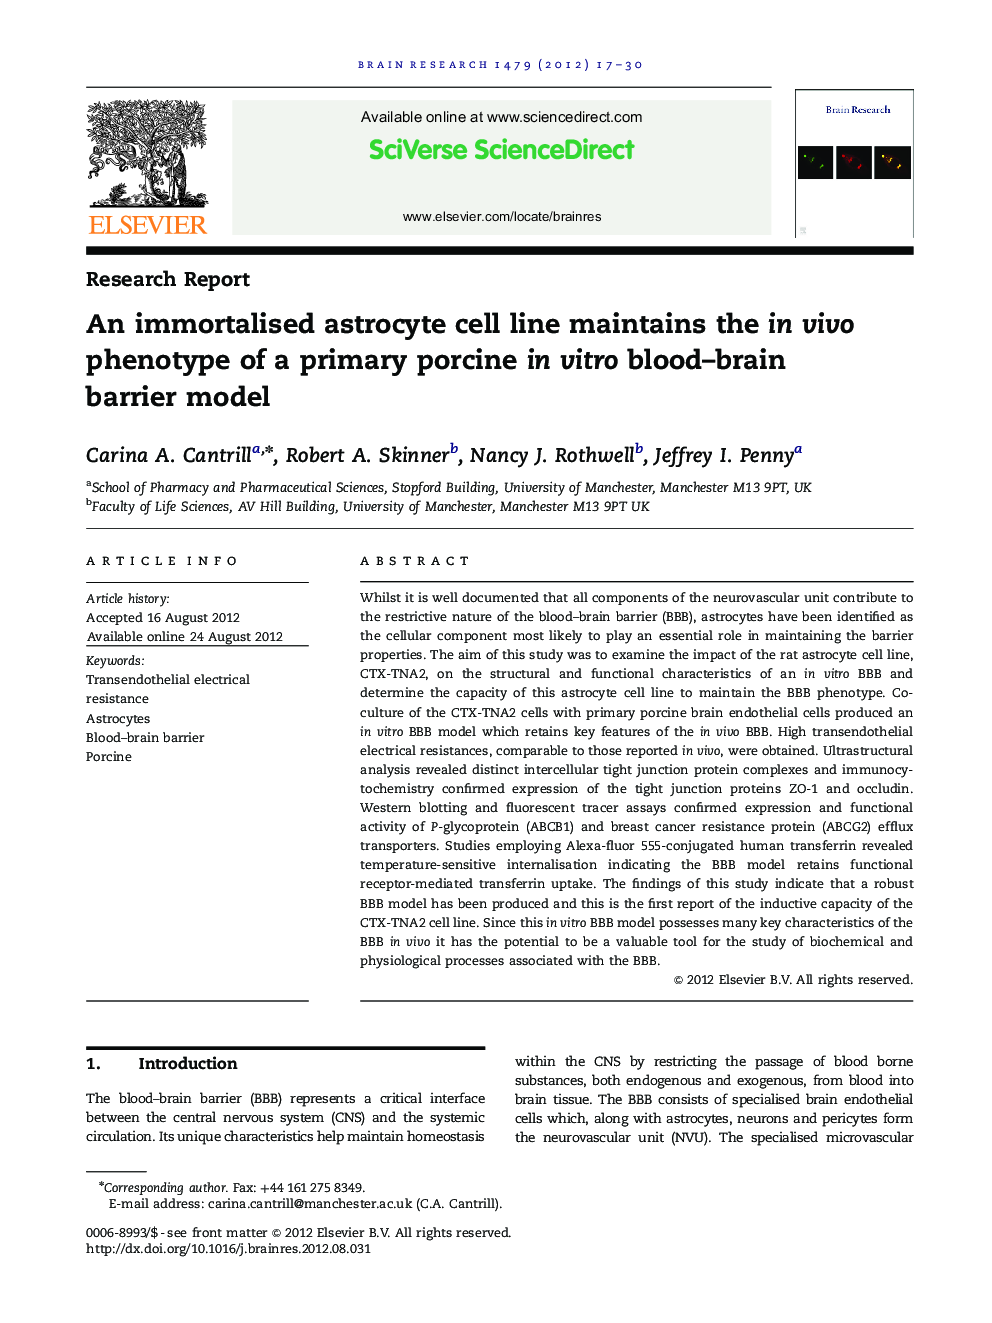 An immortalised astrocyte cell line maintains the in vivo phenotype of a primary porcine in vitro blood–brain barrier model